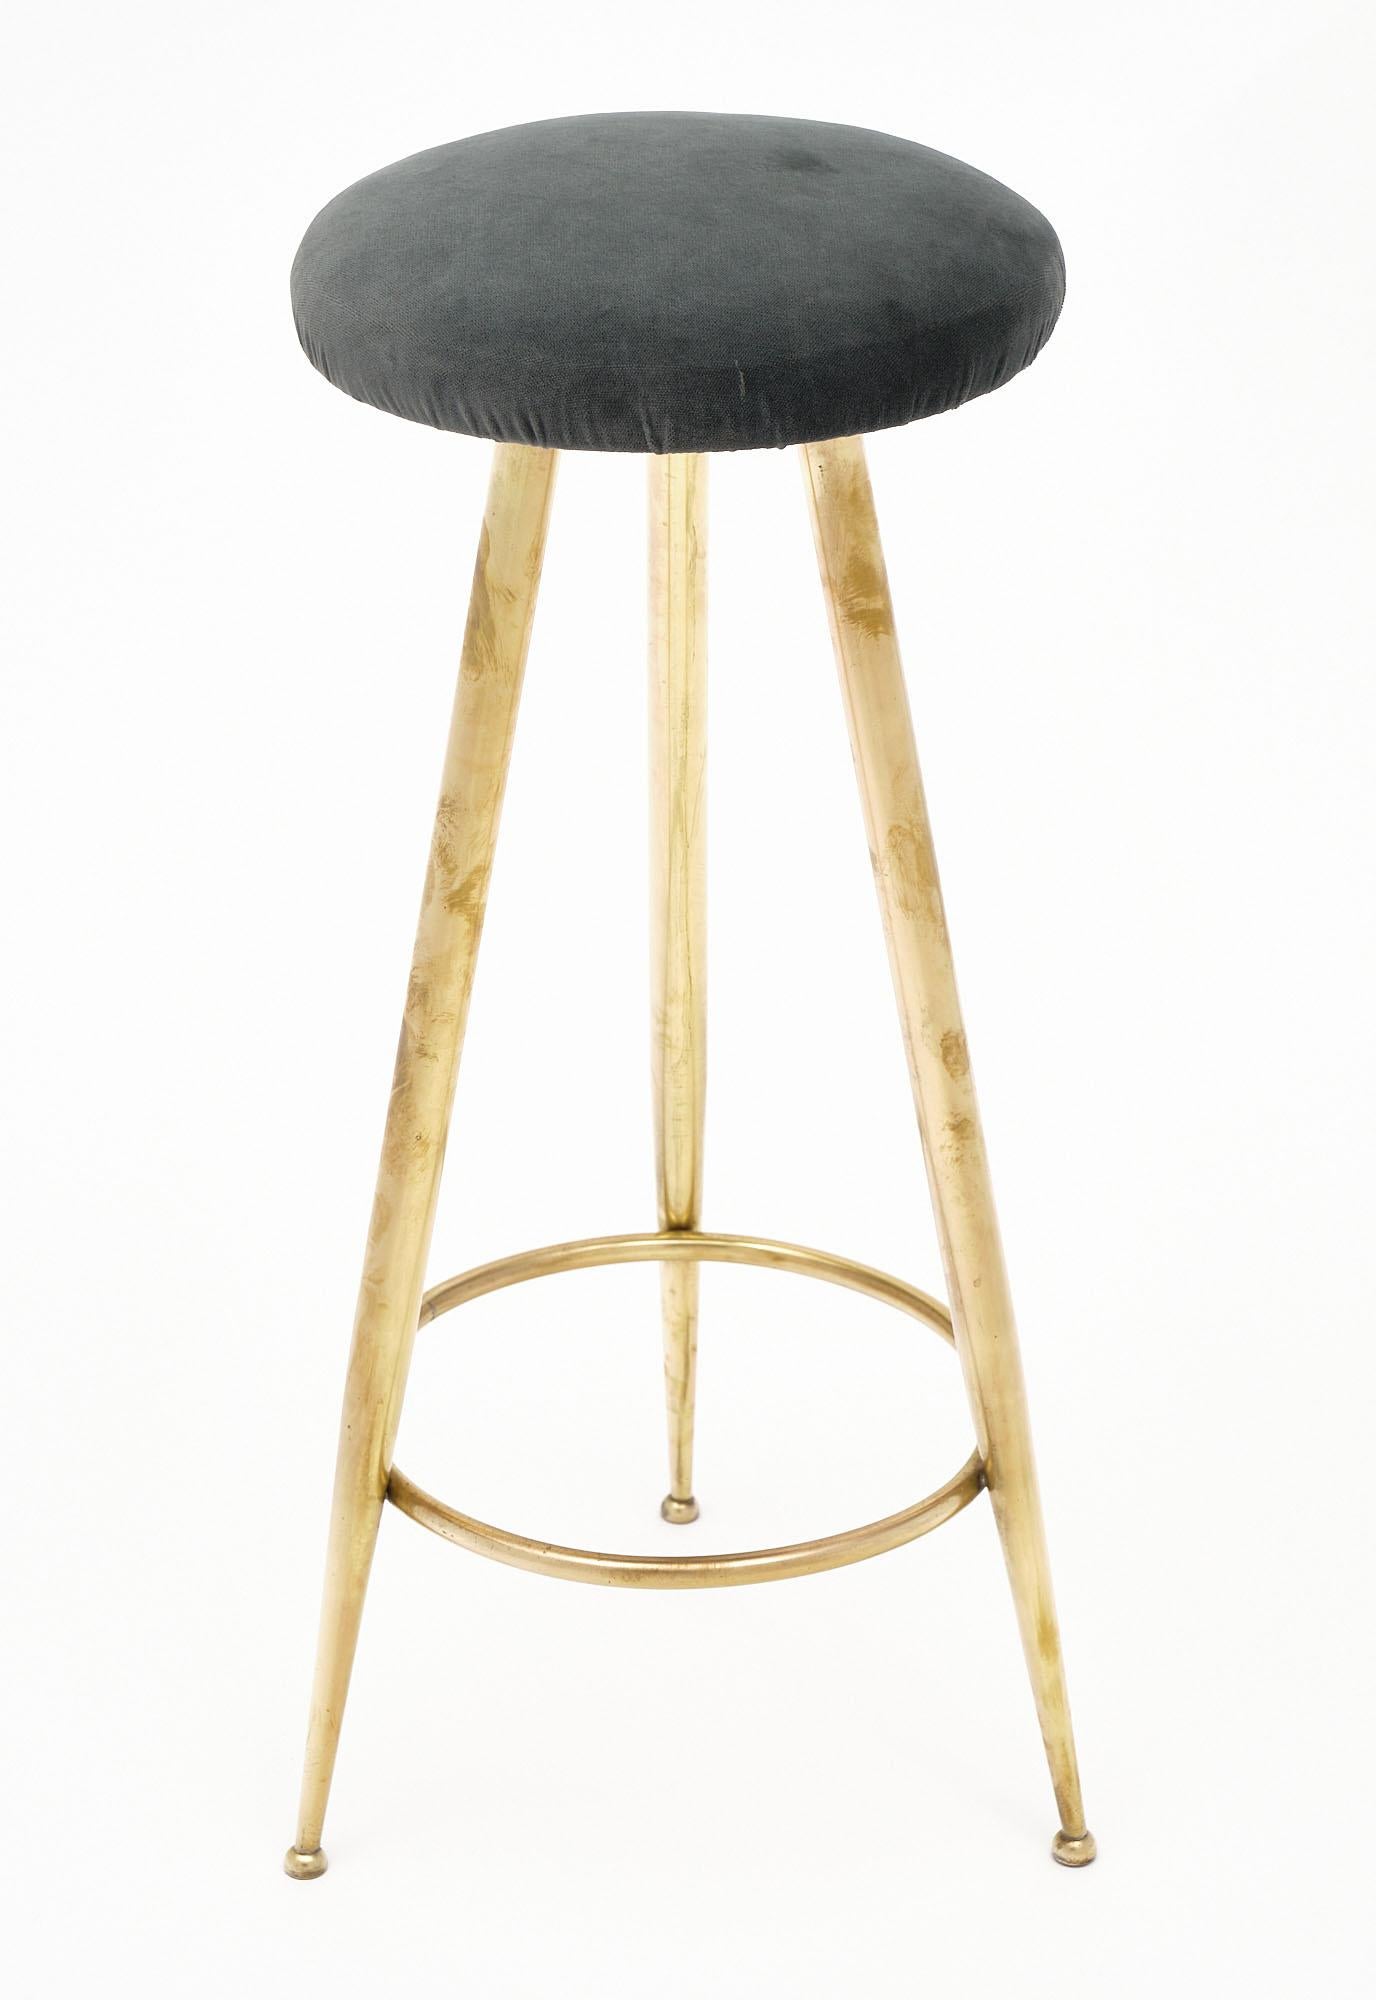 Italian Vintage Brass Stool In Good Condition For Sale In Austin, TX